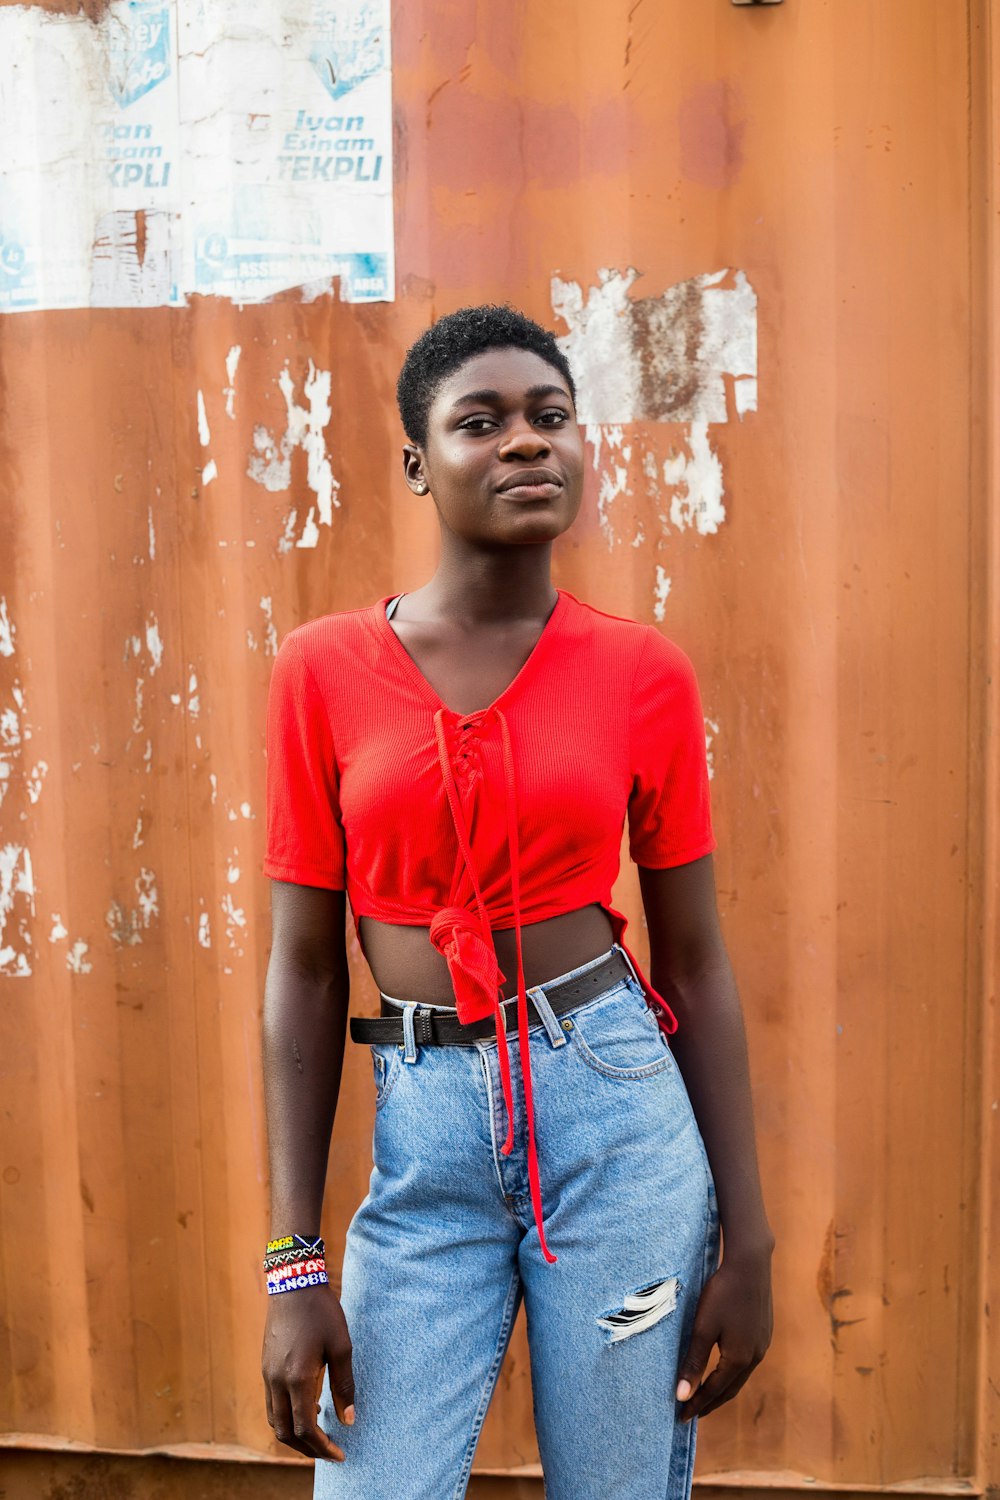 Woman in red crew neck t-shirt and blue denim jeans standing beside brown wooden door photo – Free #youth #fashion #fashiongirl #fashion Image on Unsplash